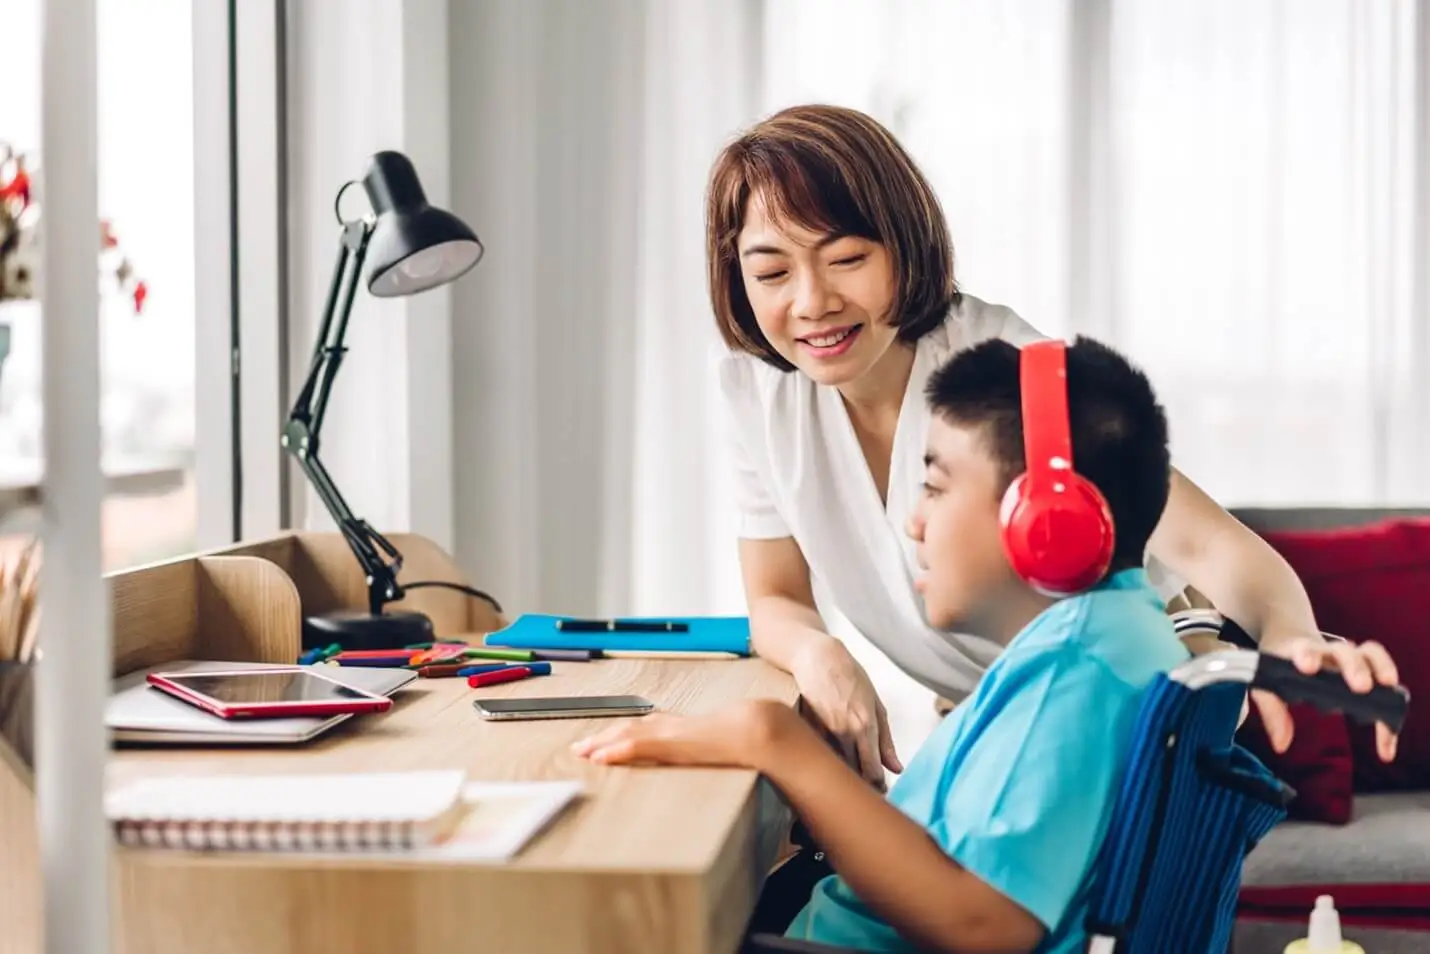 A child listens to headphones while an adult looks on.